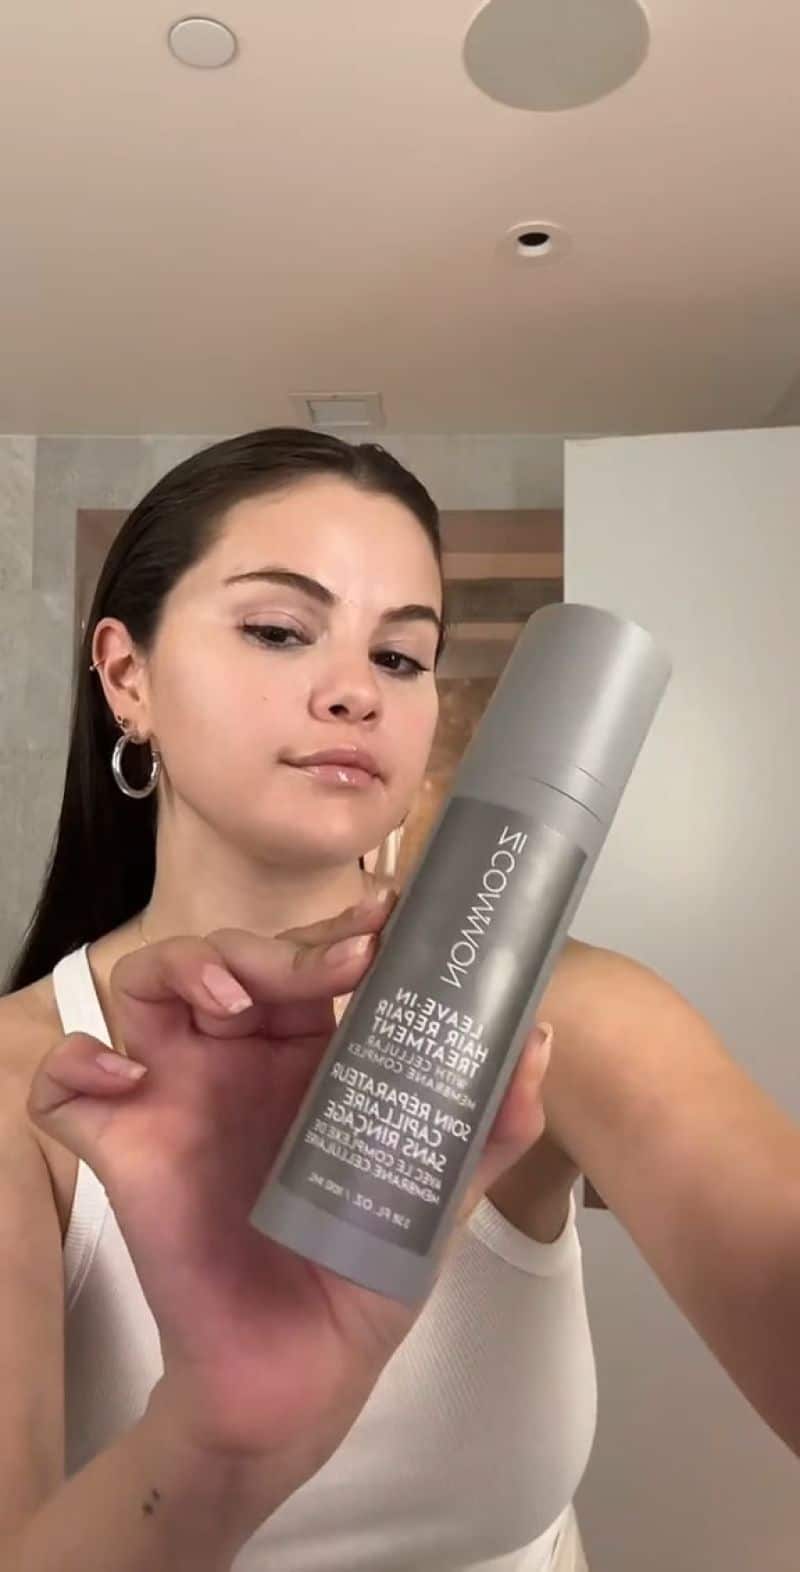 Selena Gomez Prepares for the Golden Globes with "Rare Beauty" Products